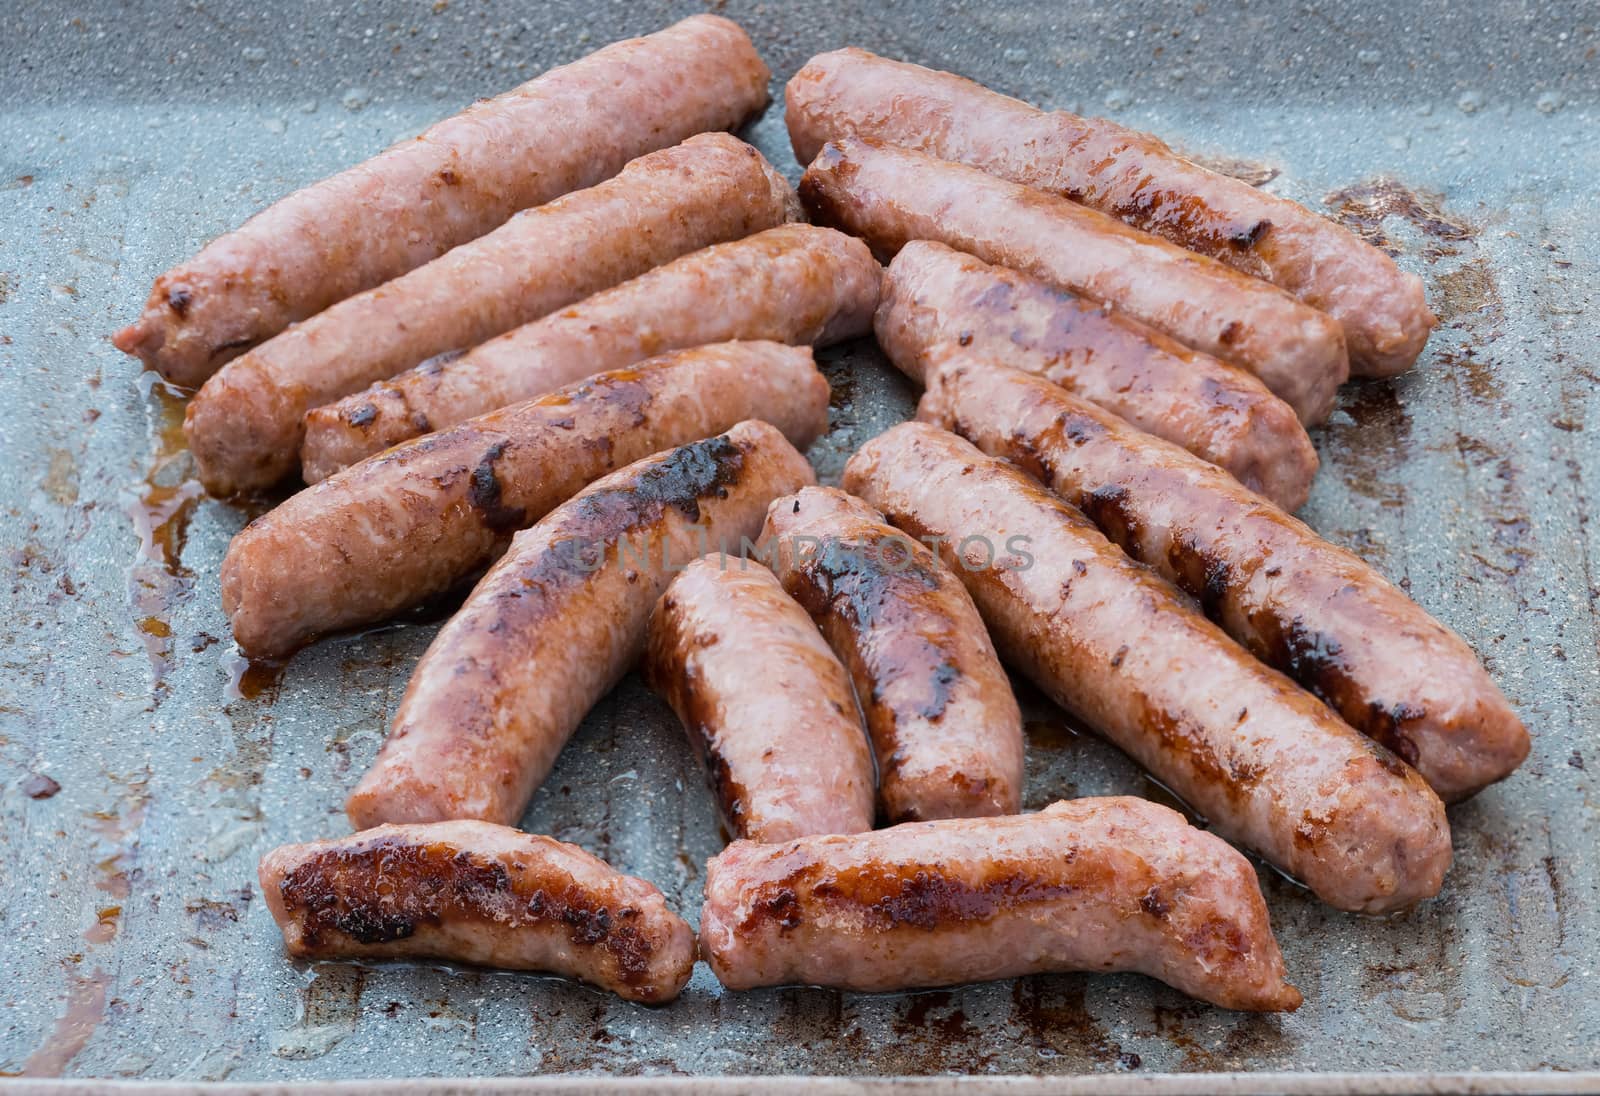 Sausages just cooked close-up by Robertobinetti70